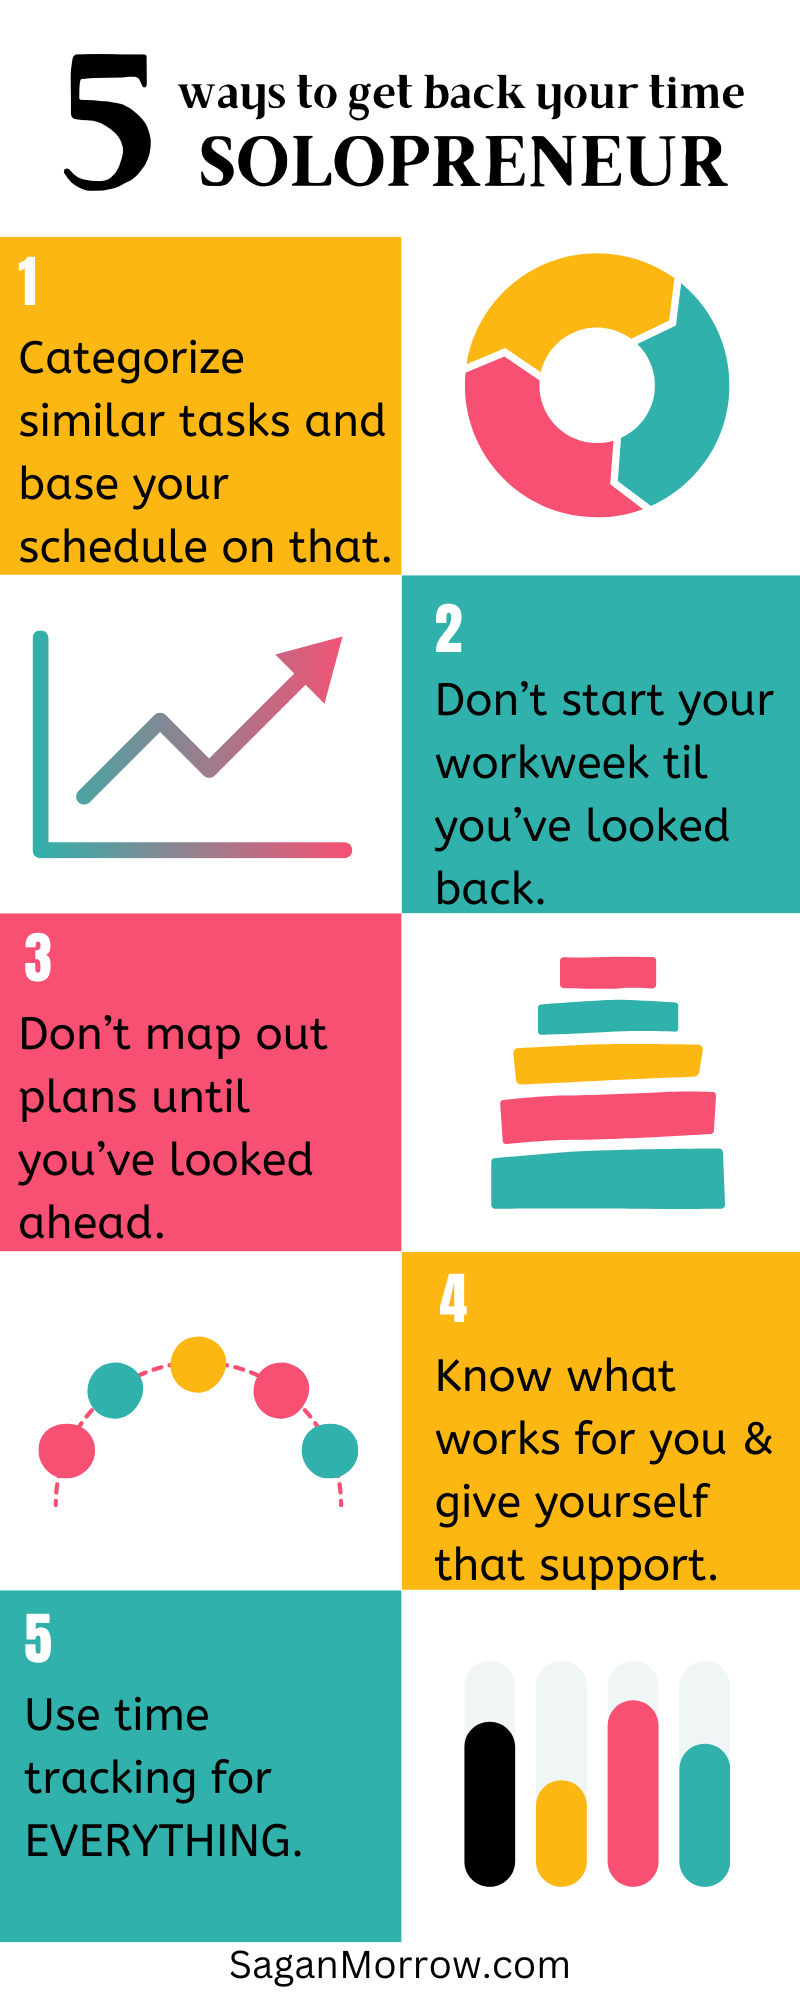 5 ways to get back your time as a solopreneur - time management for freelancers infographic